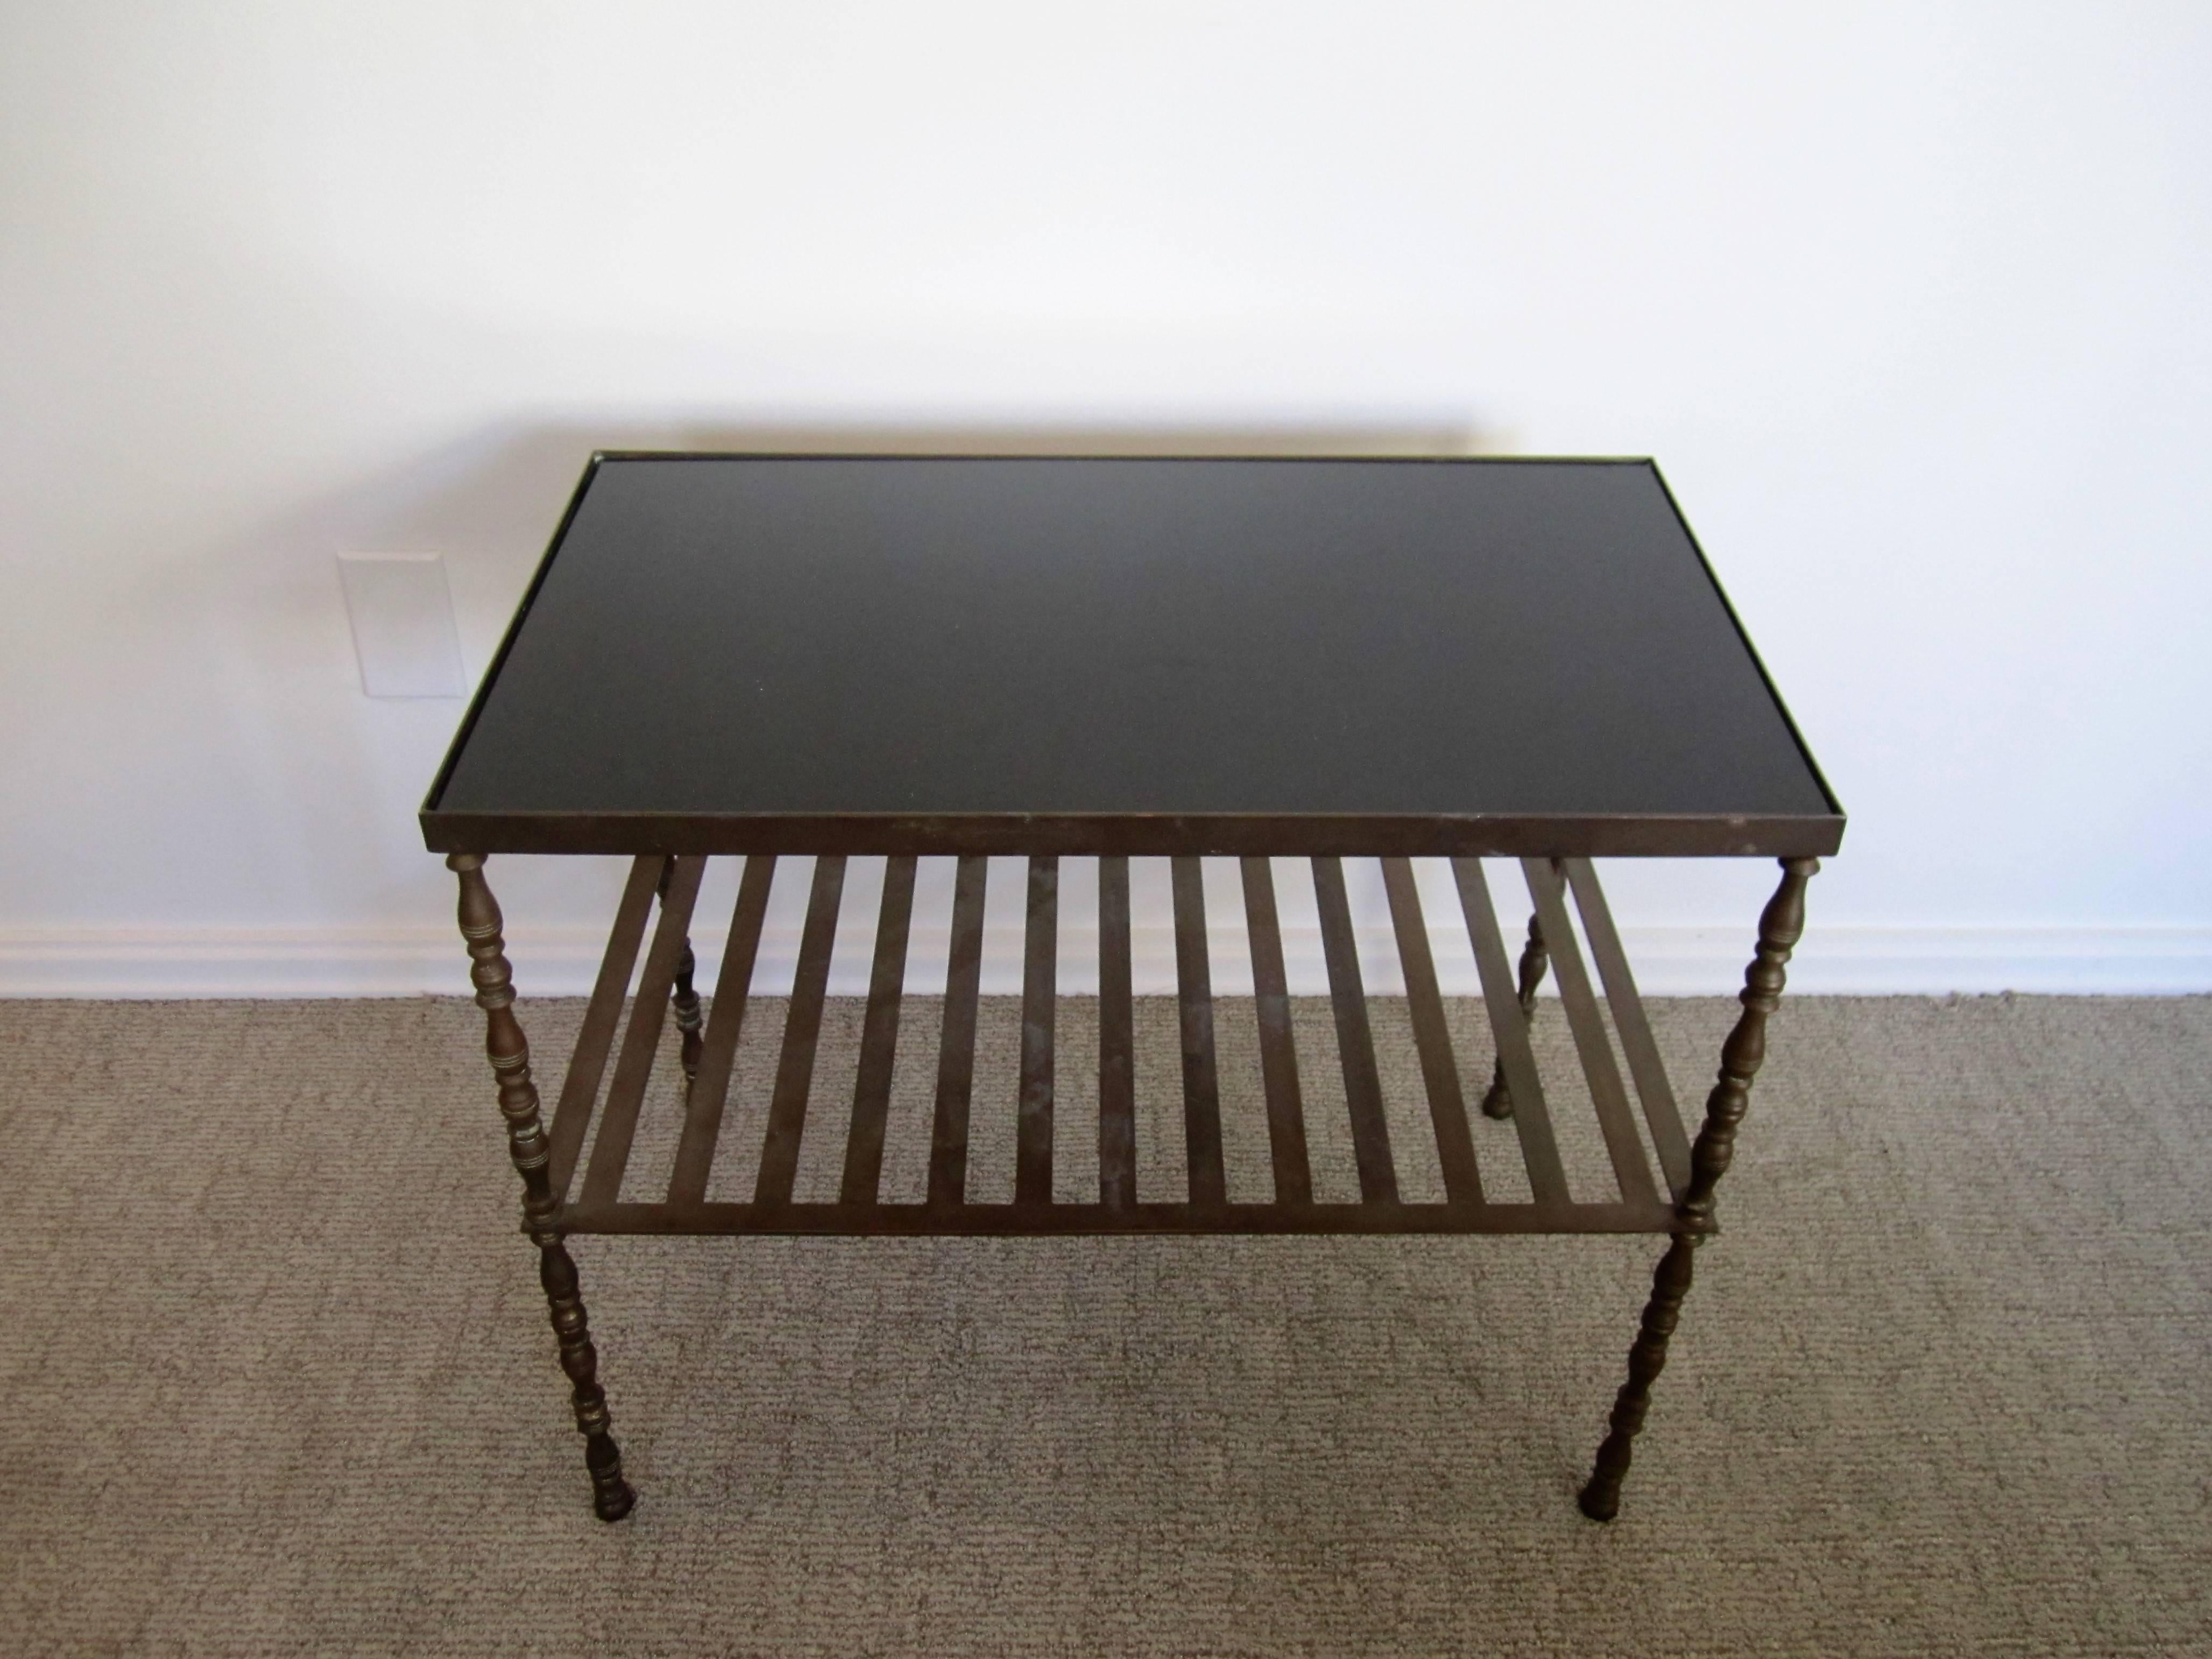 A Mid-Century French vintage bronze table that can double as an end or cocktail table, bookcase, or bar. This rectangular bronze table has a black glass top, spindle legs, and lower slatted shelf. Glass top is inset. Measurements include: 20' h x